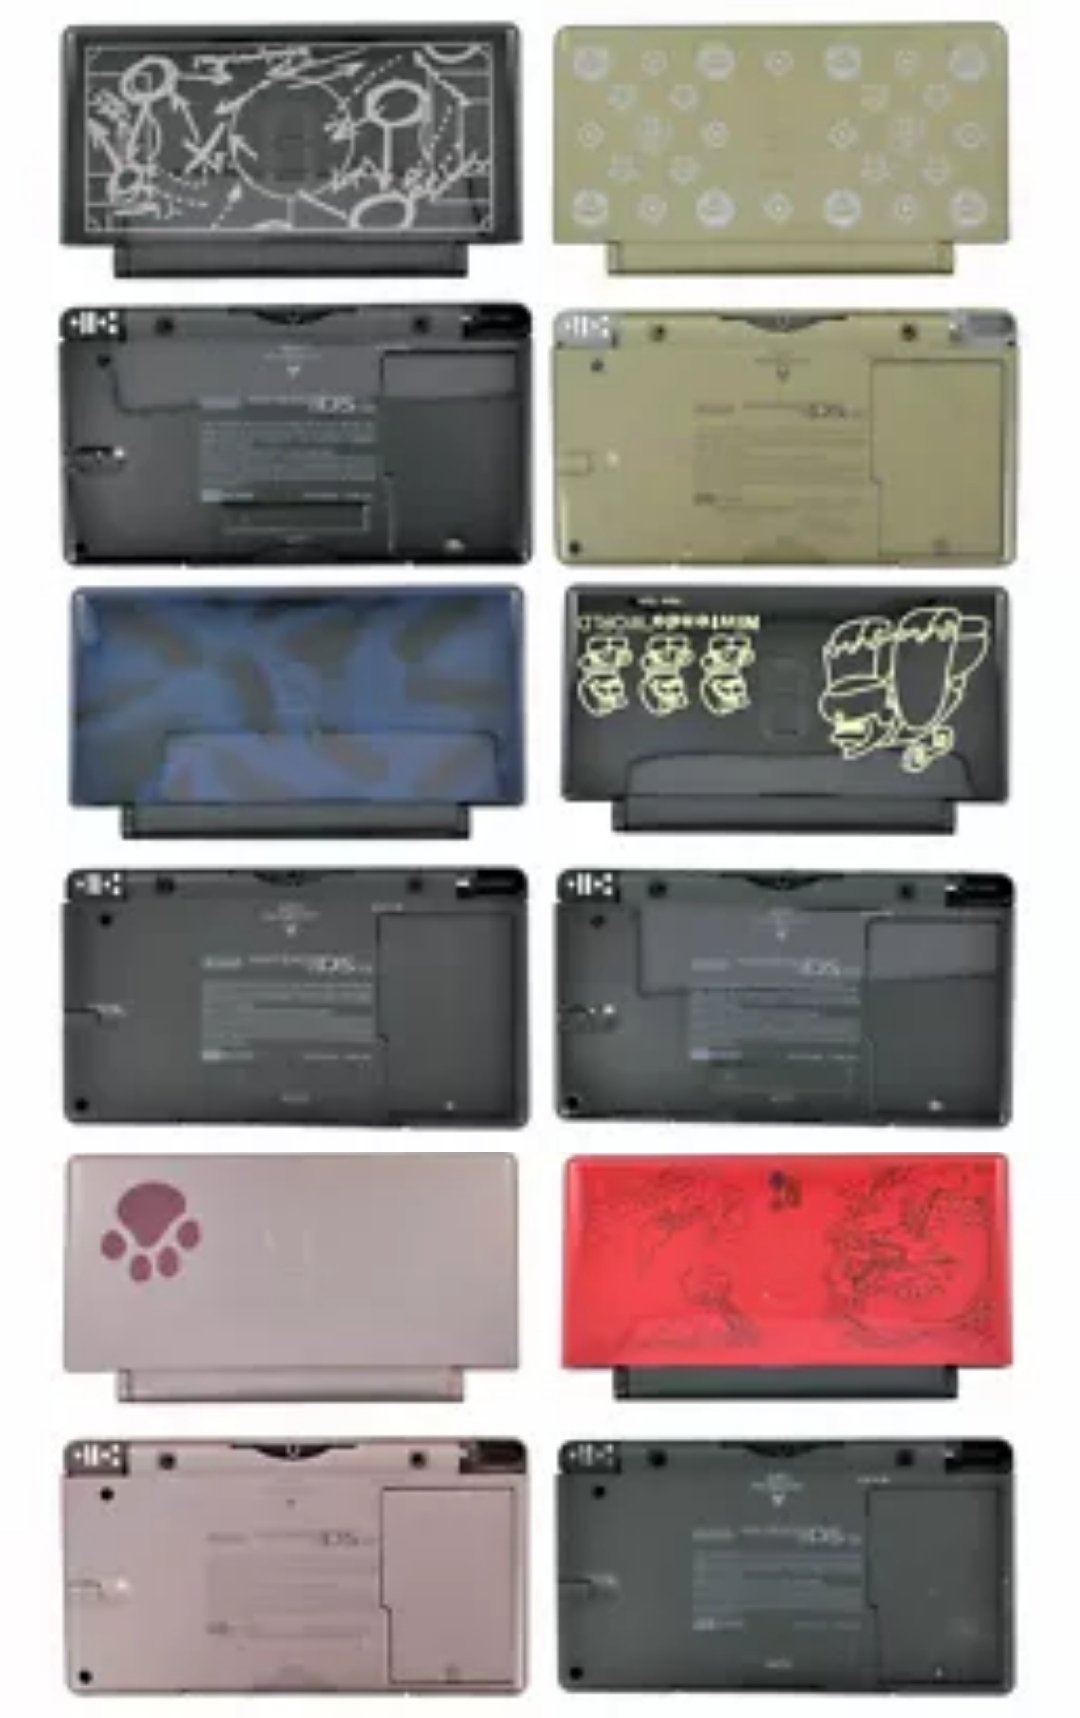 Seeking suggestions for ds lite shell parts | GBAtemp.net - The Independent  Video Game Community